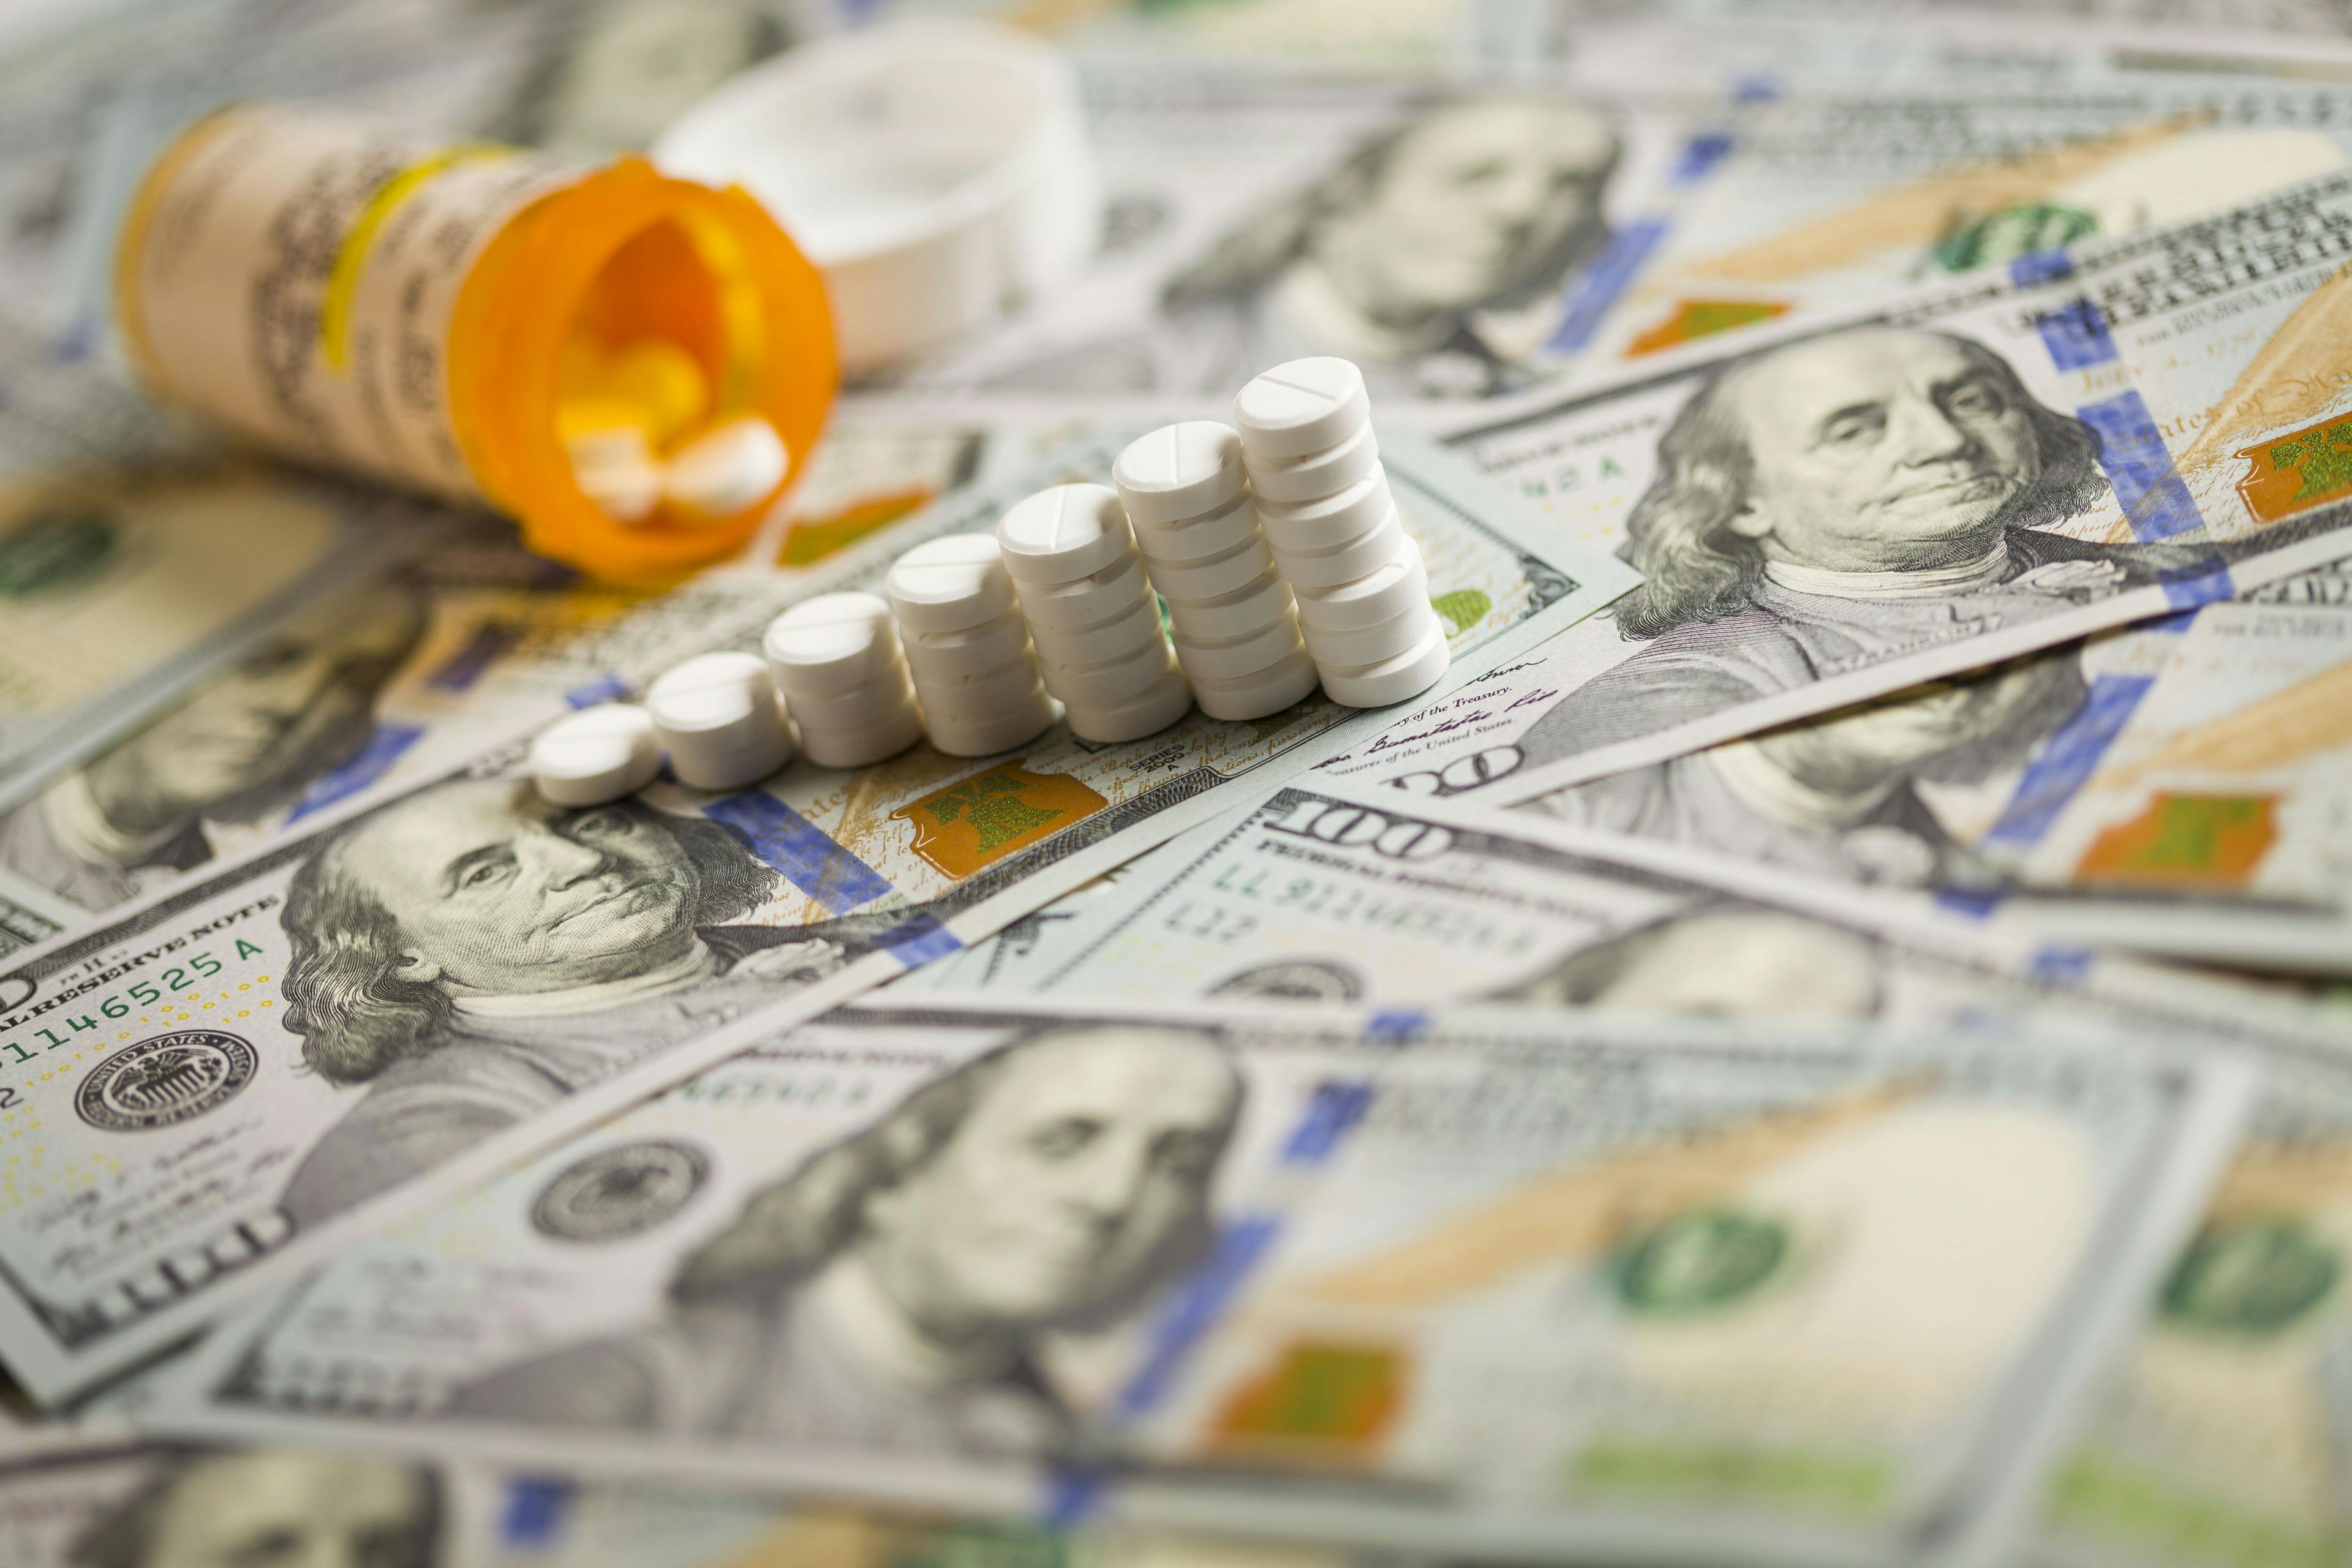 Upcoming DIR Fee Changes Still Causing Concern for Pharmacists